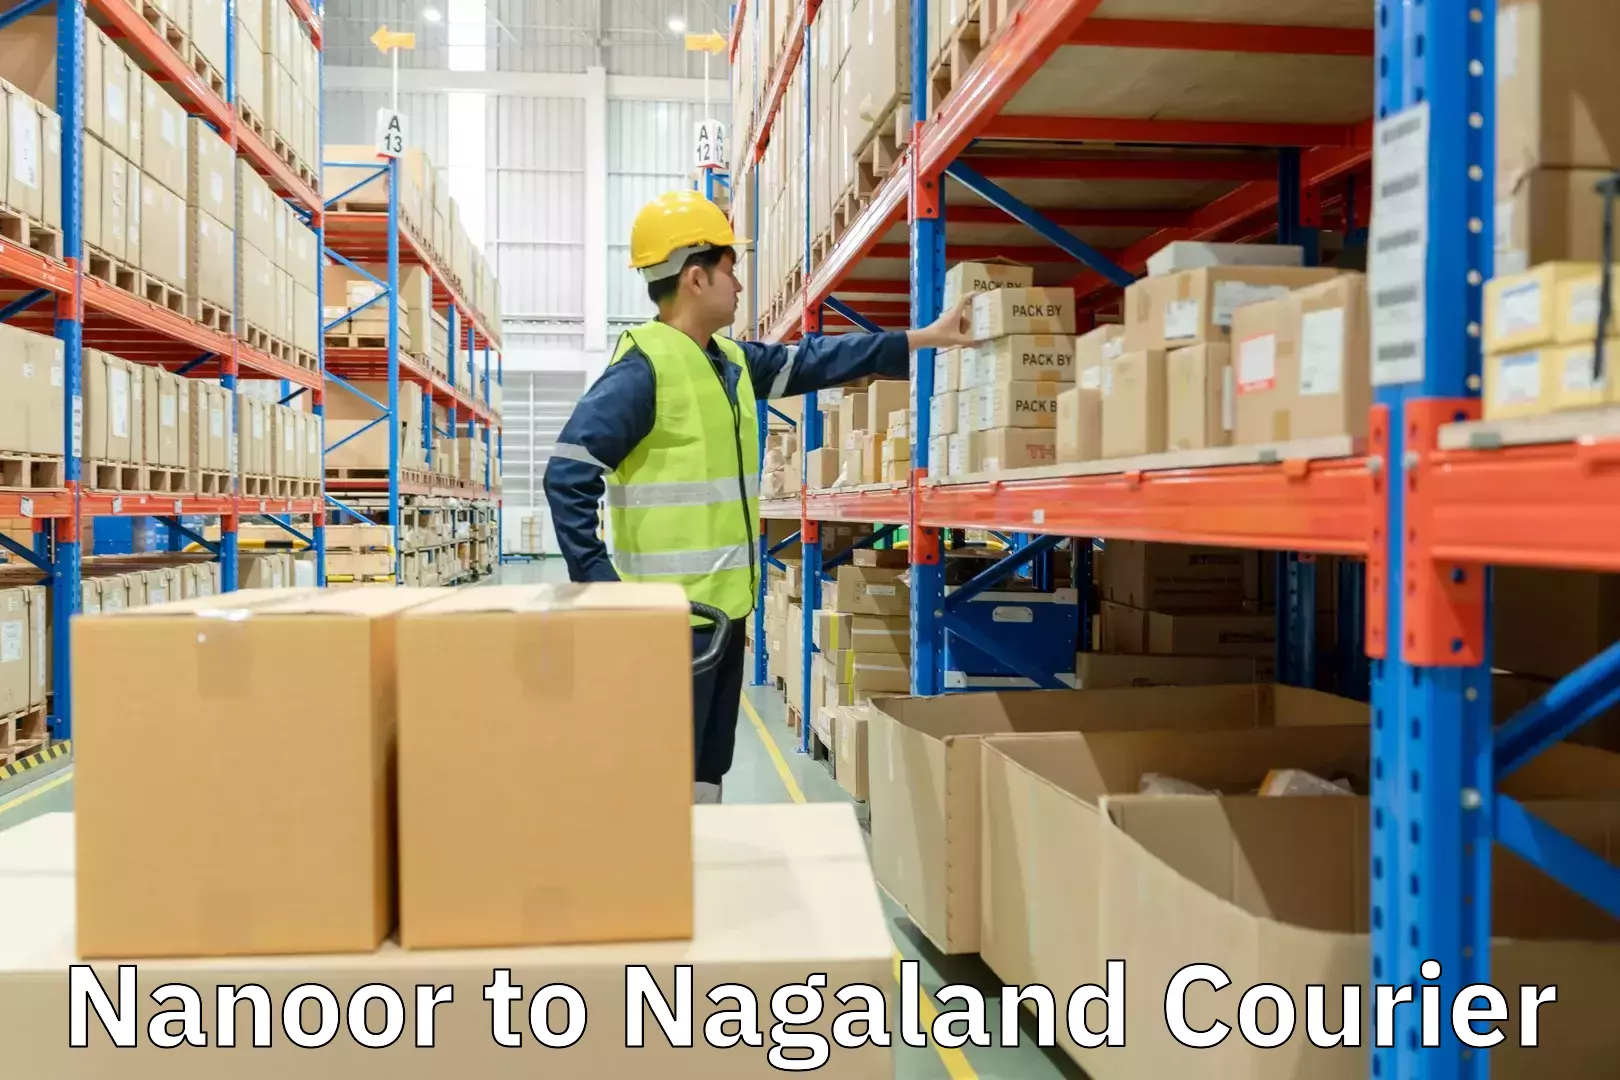 Courier service innovation Nanoor to Nagaland